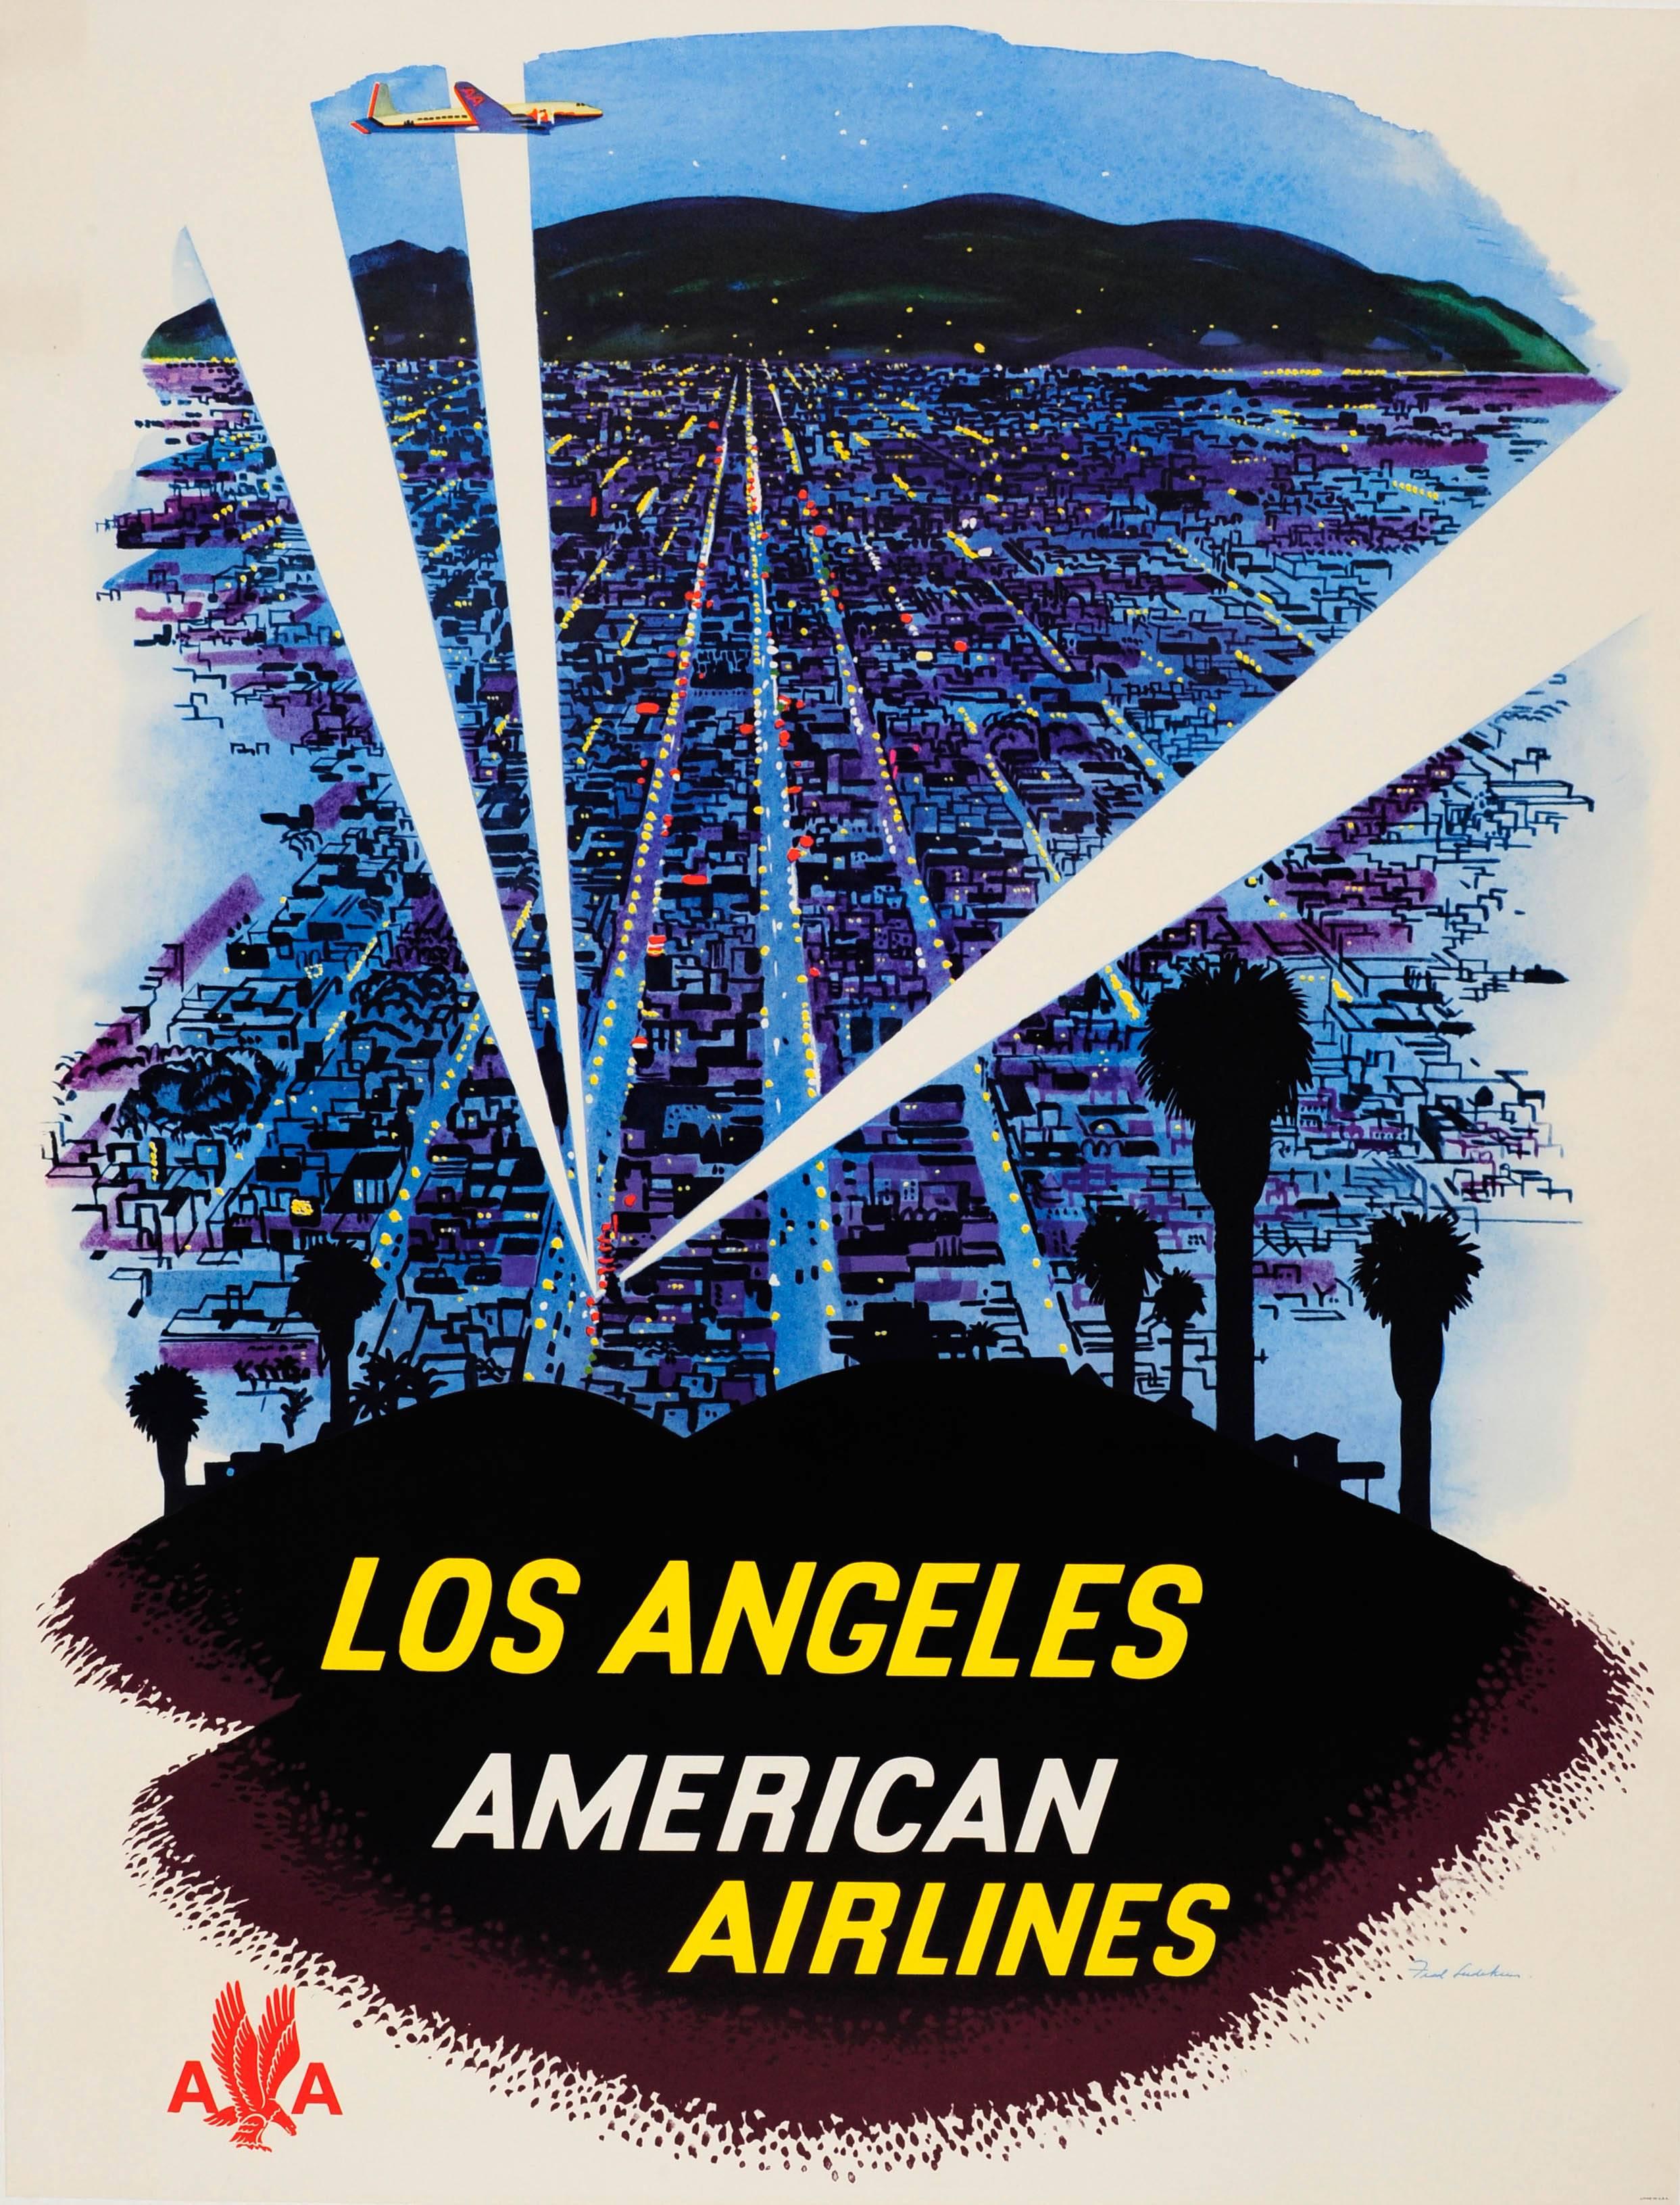 Fred Ludekens Print - Original Vintage American Airlines Travel Advertising Poster For Los Angeles